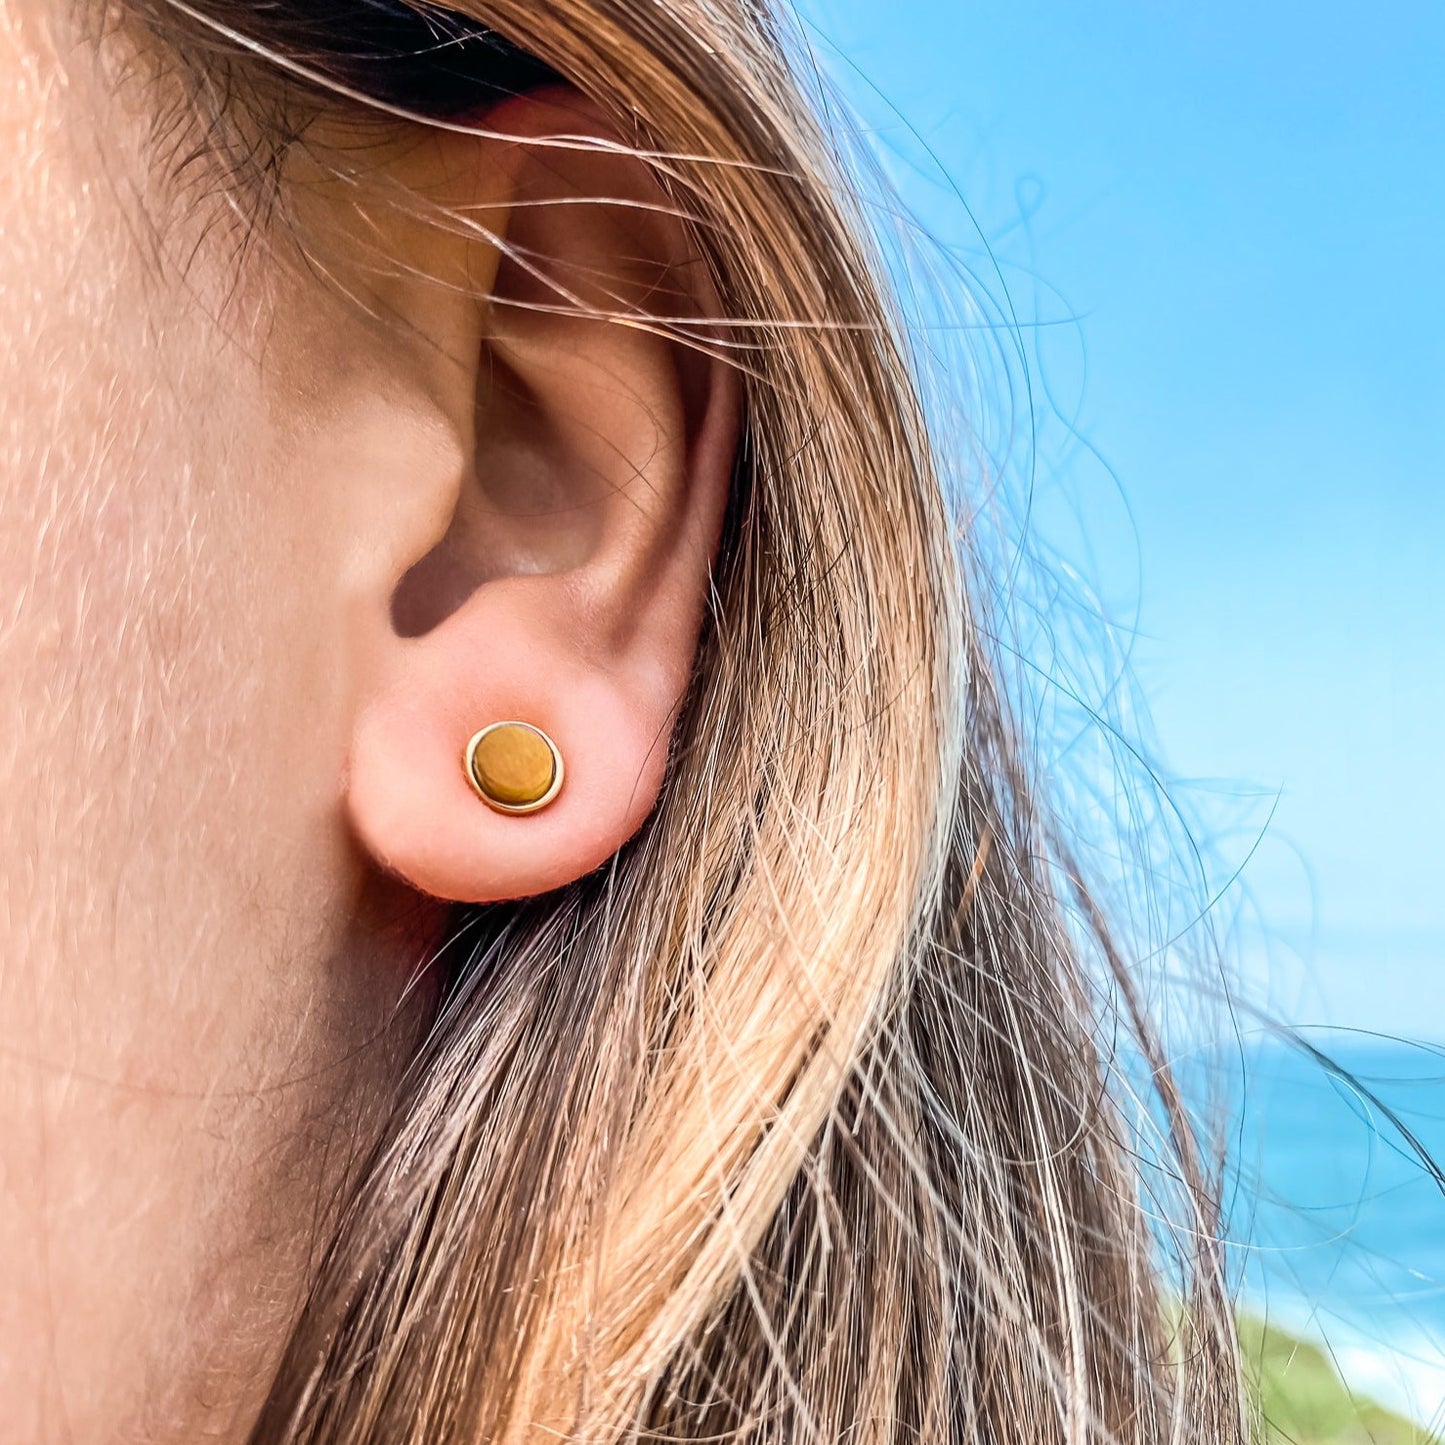 5mm Round Stud Yellow Gold Plated Earrings in Yellow Dyed Feldspar Natural Gemstone Made by Born to Rock. Online Jewelry Based in San Diego California